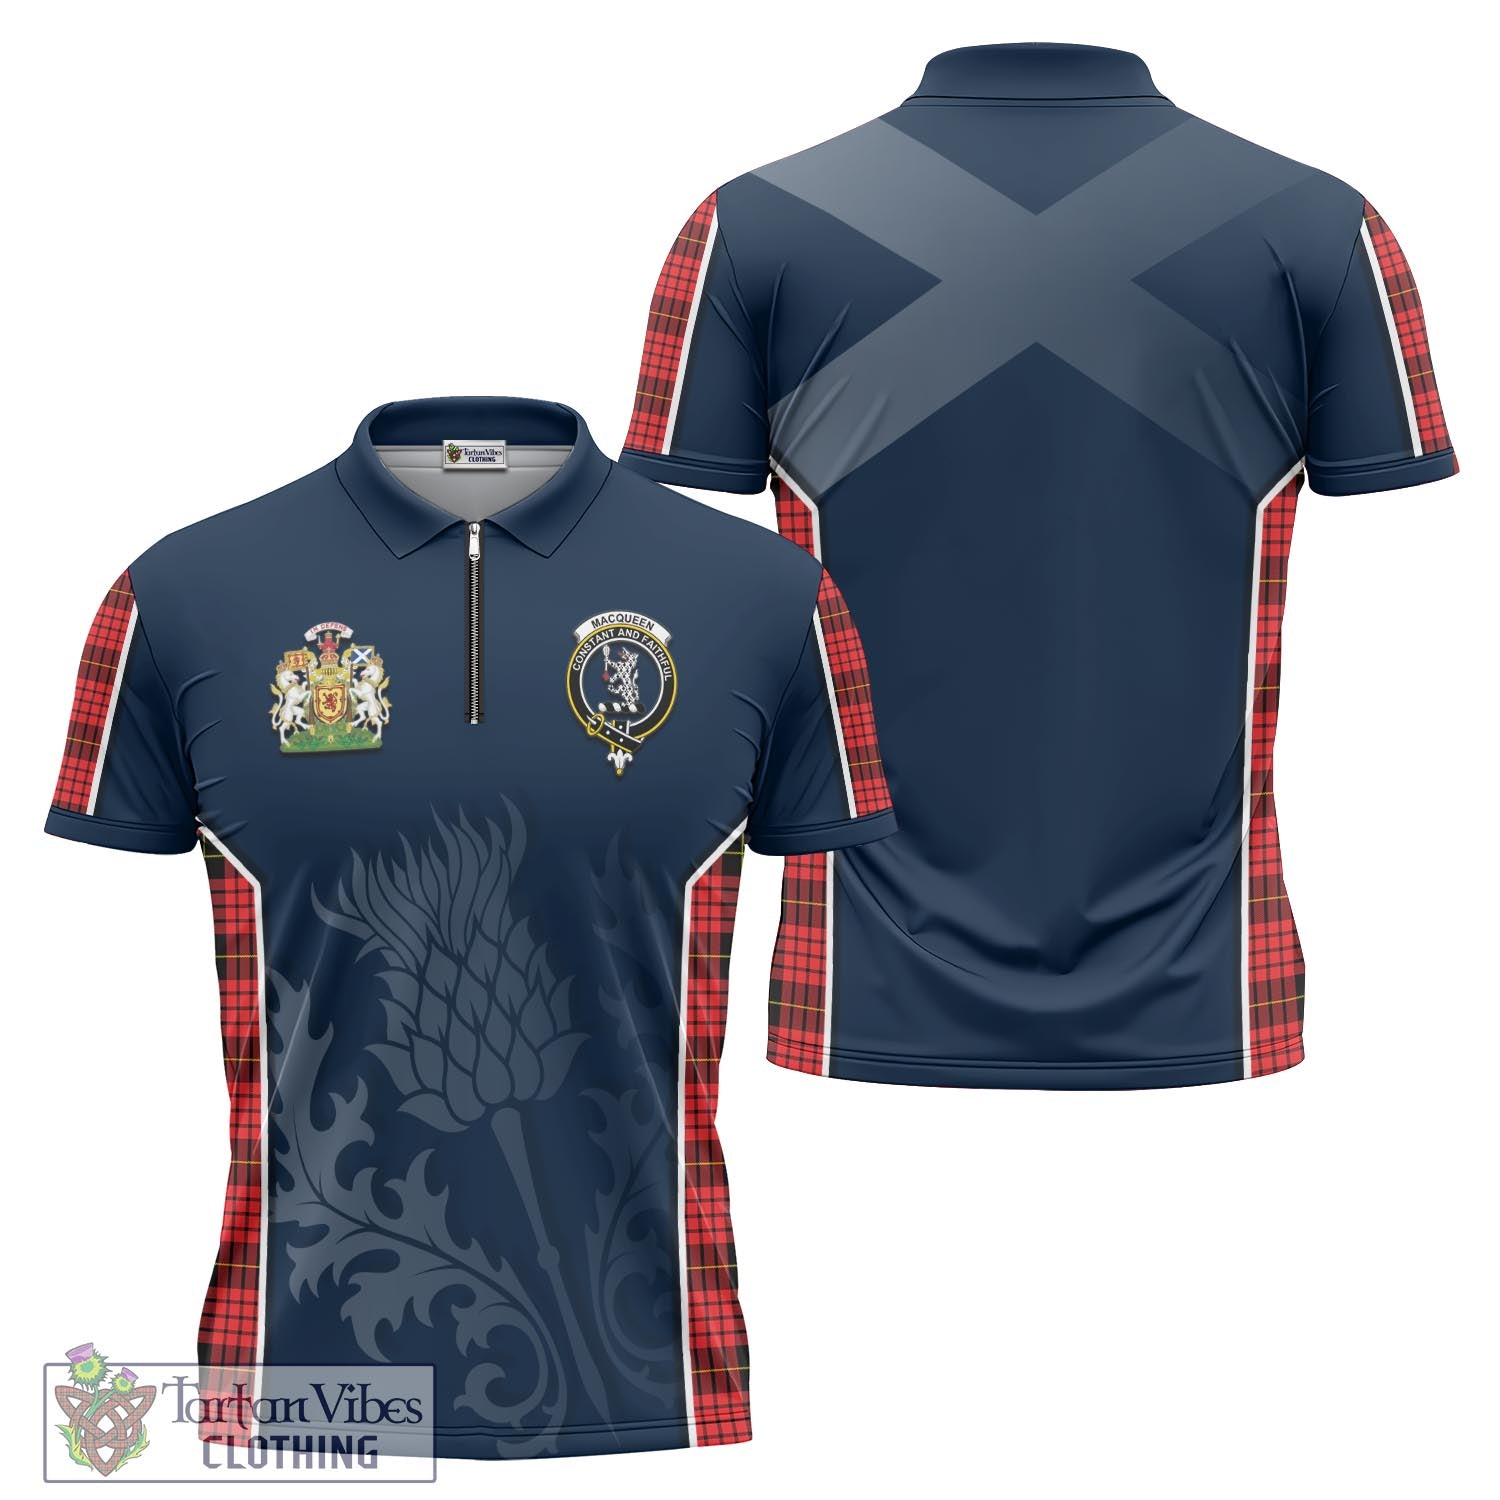 Tartan Vibes Clothing MacQueen Modern Tartan Zipper Polo Shirt with Family Crest and Scottish Thistle Vibes Sport Style